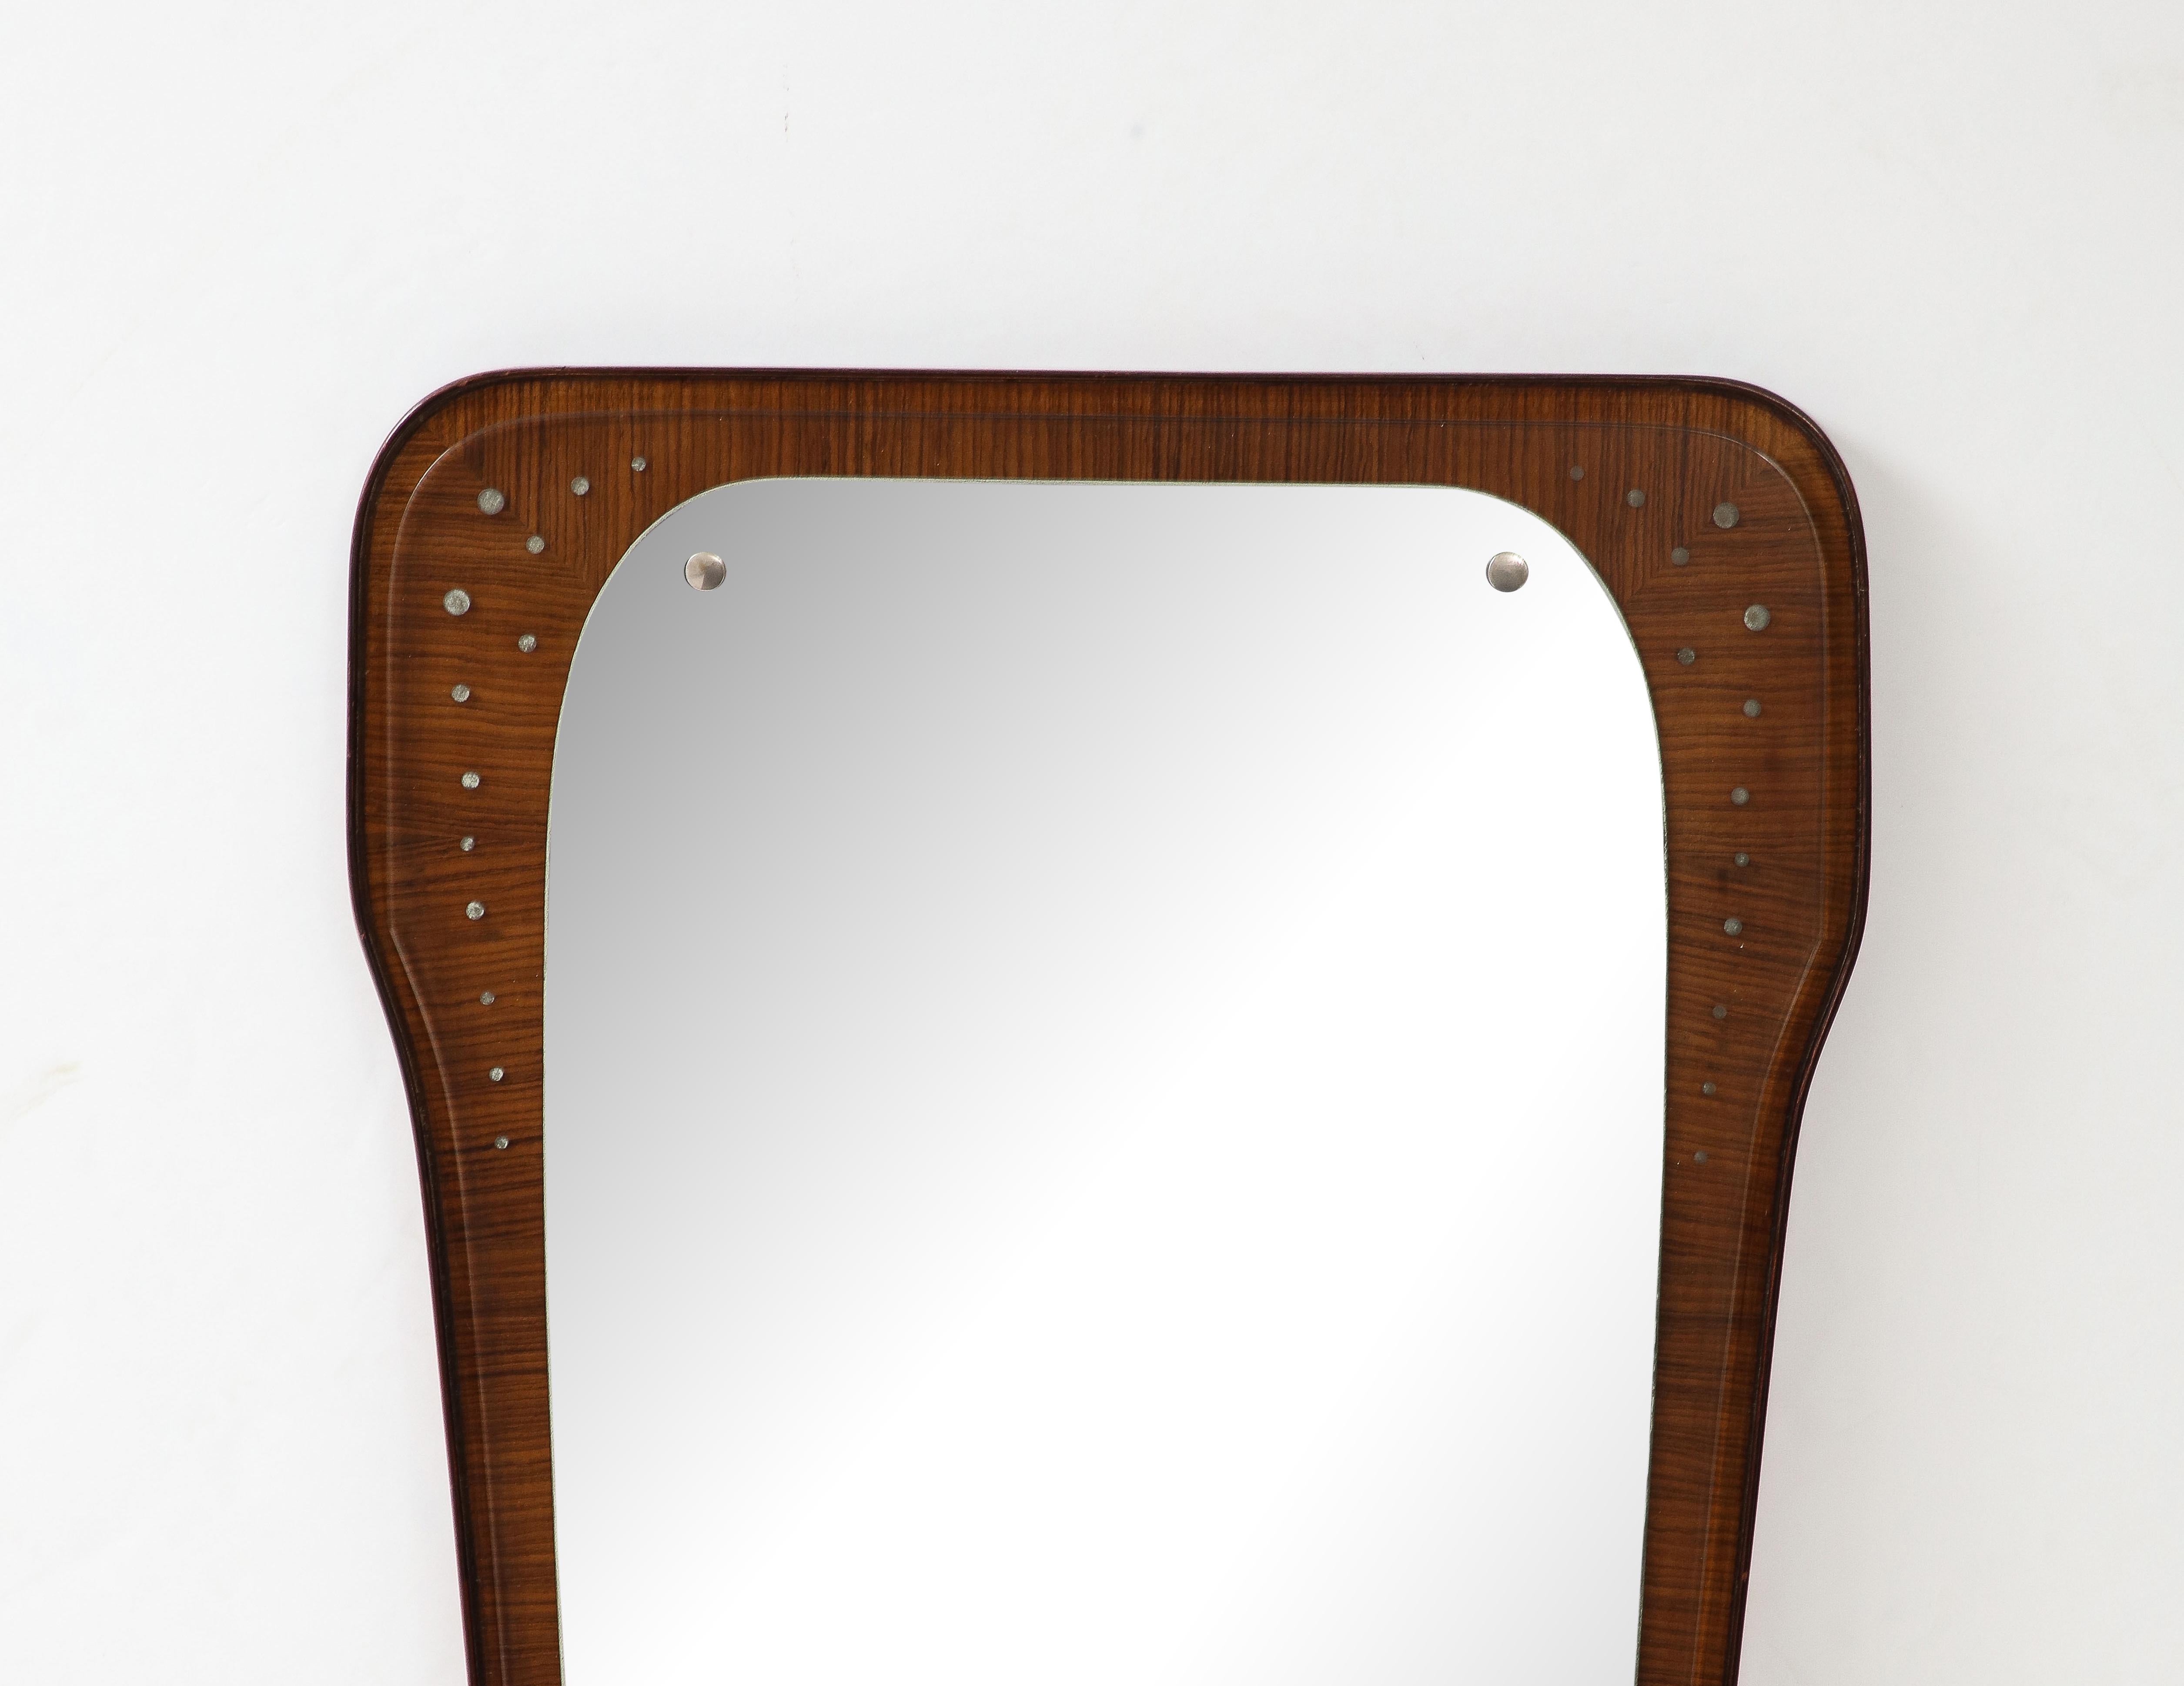 Mahogany Wall Mirror with Inlaid Metal, Italy, c. 1960 For Sale 1